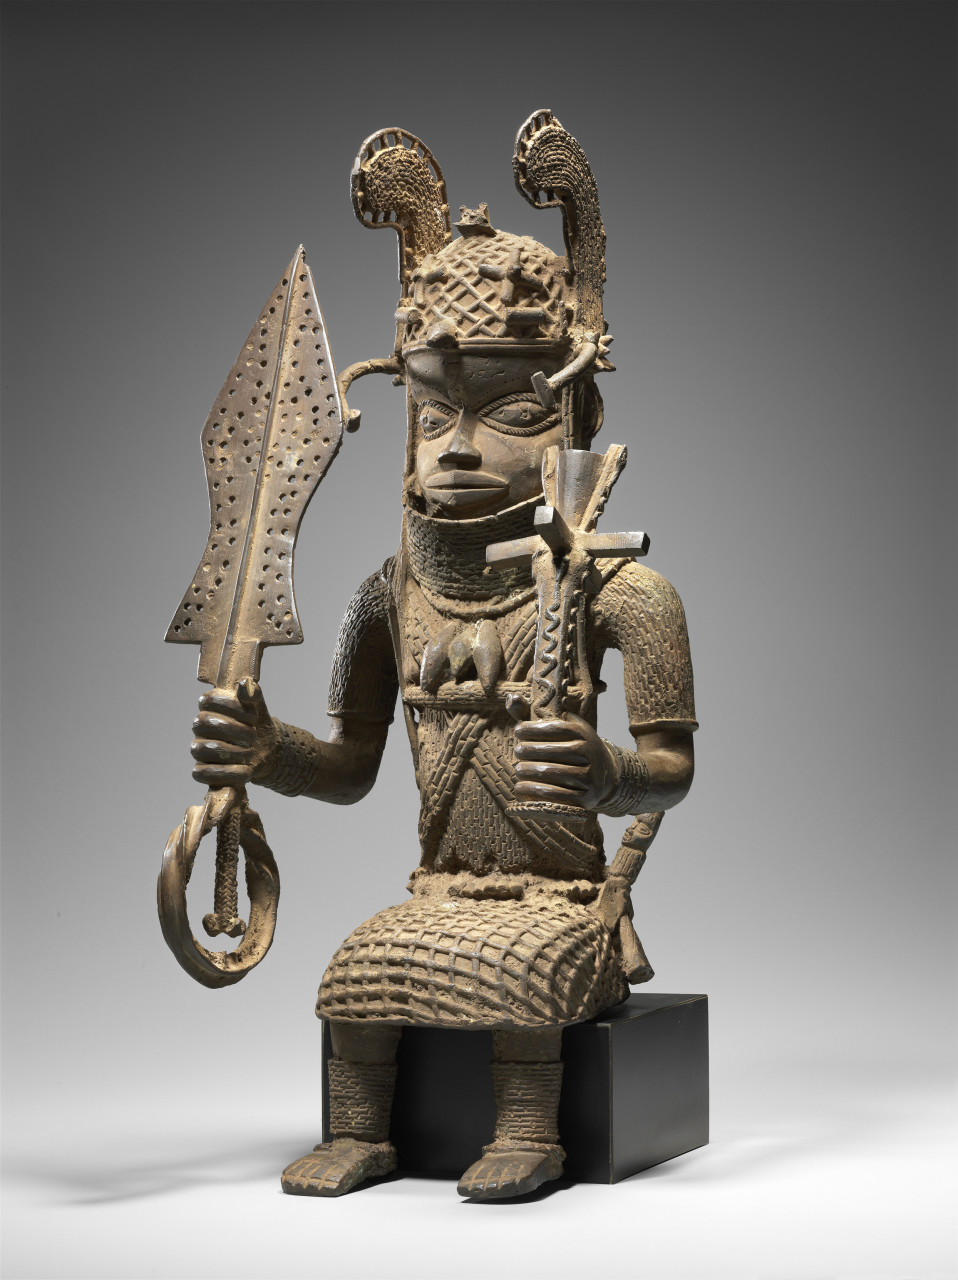 Benin altar figure with a complicated provenance lent by the estate of William E. Teel. (Courtesy Museum of Fine Arts)